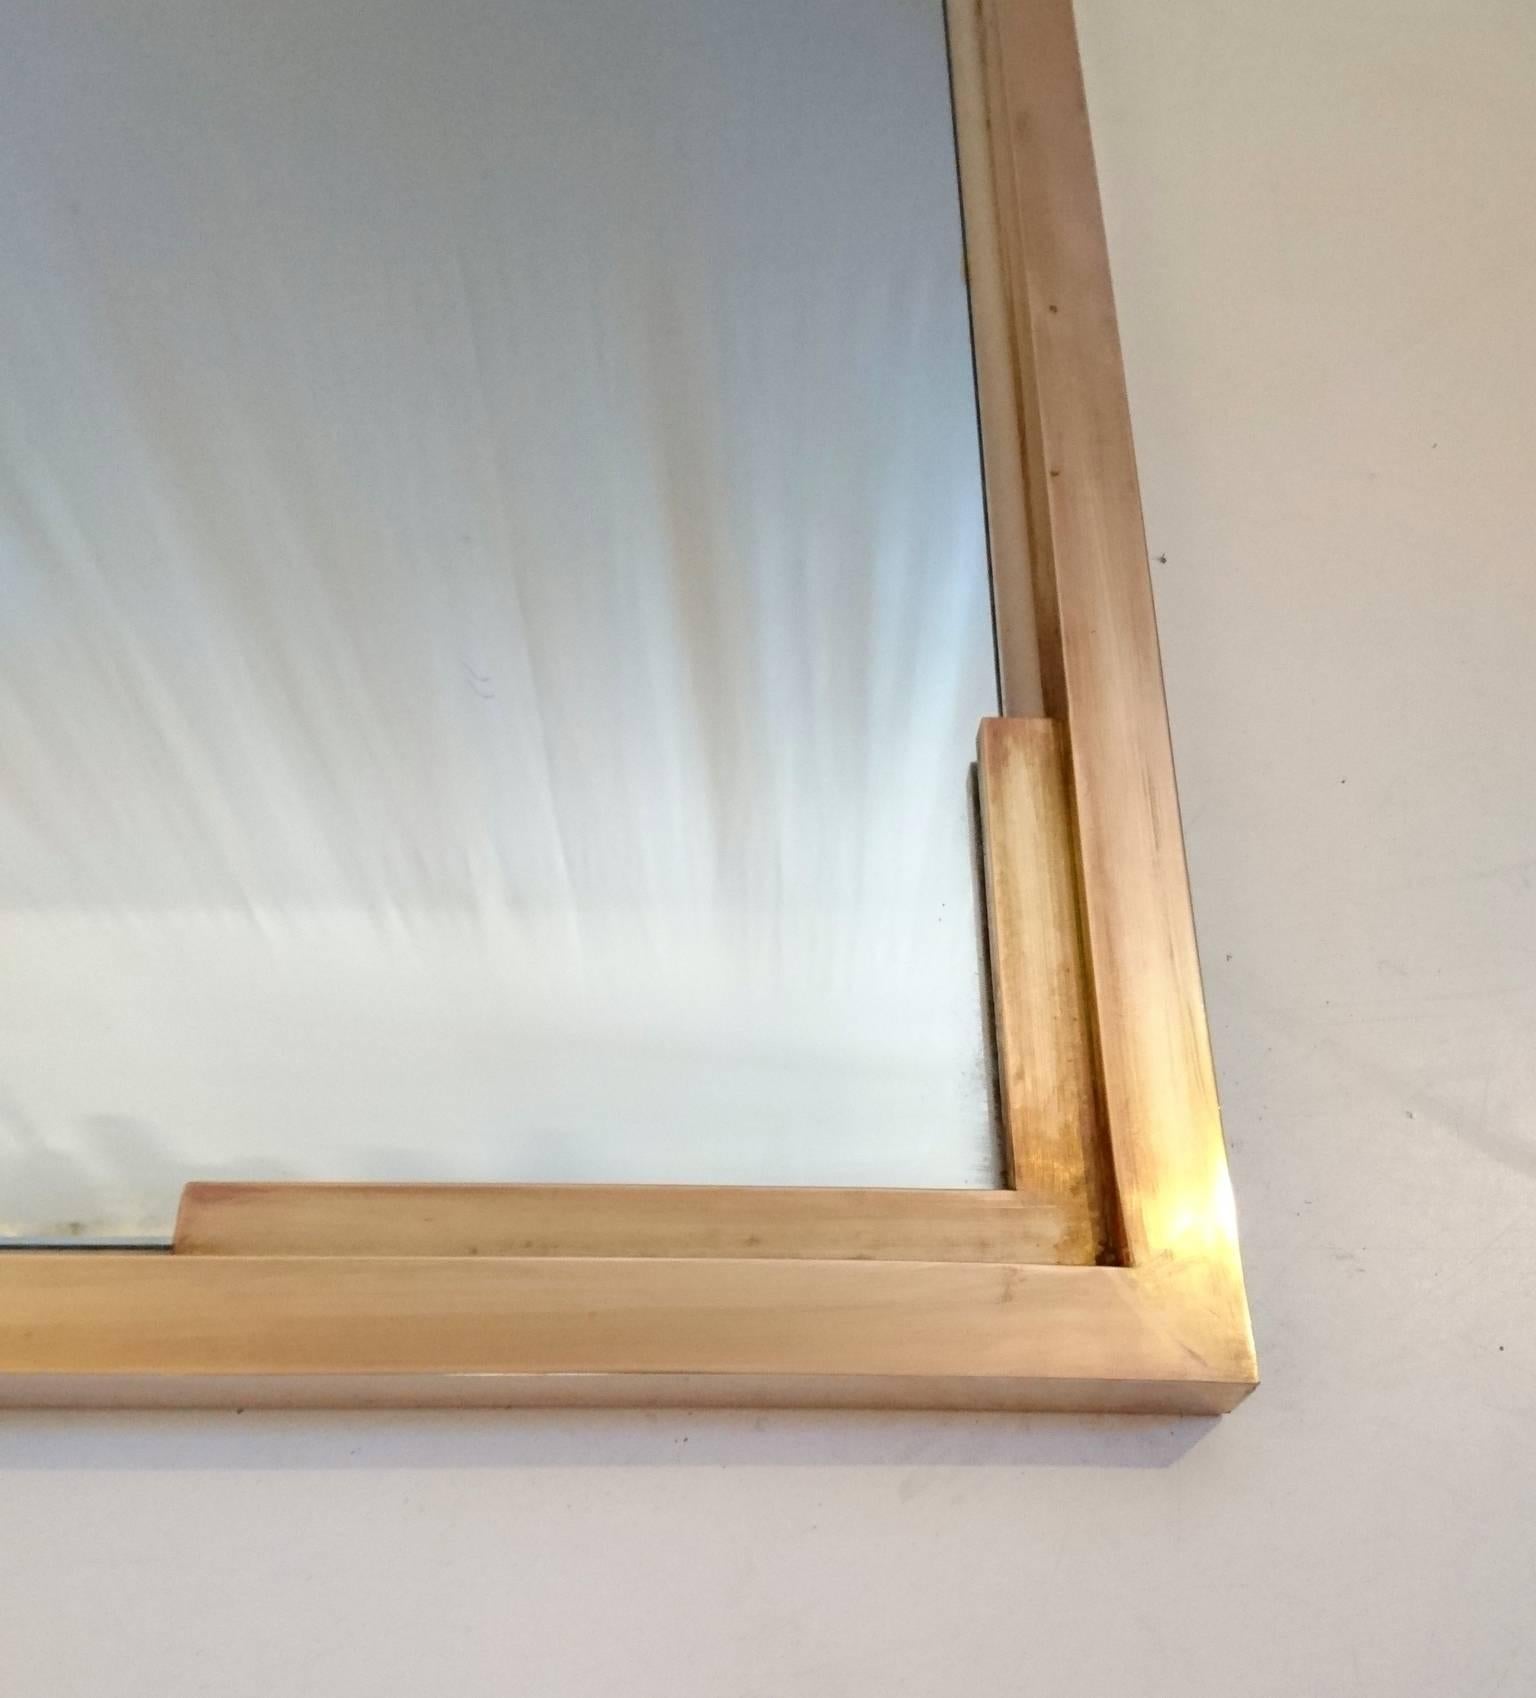 Grand and unique full length mirror in with solid brass frame. Can be placed on the floor or on the wall. The glass has some color spots and can be changed upon request.